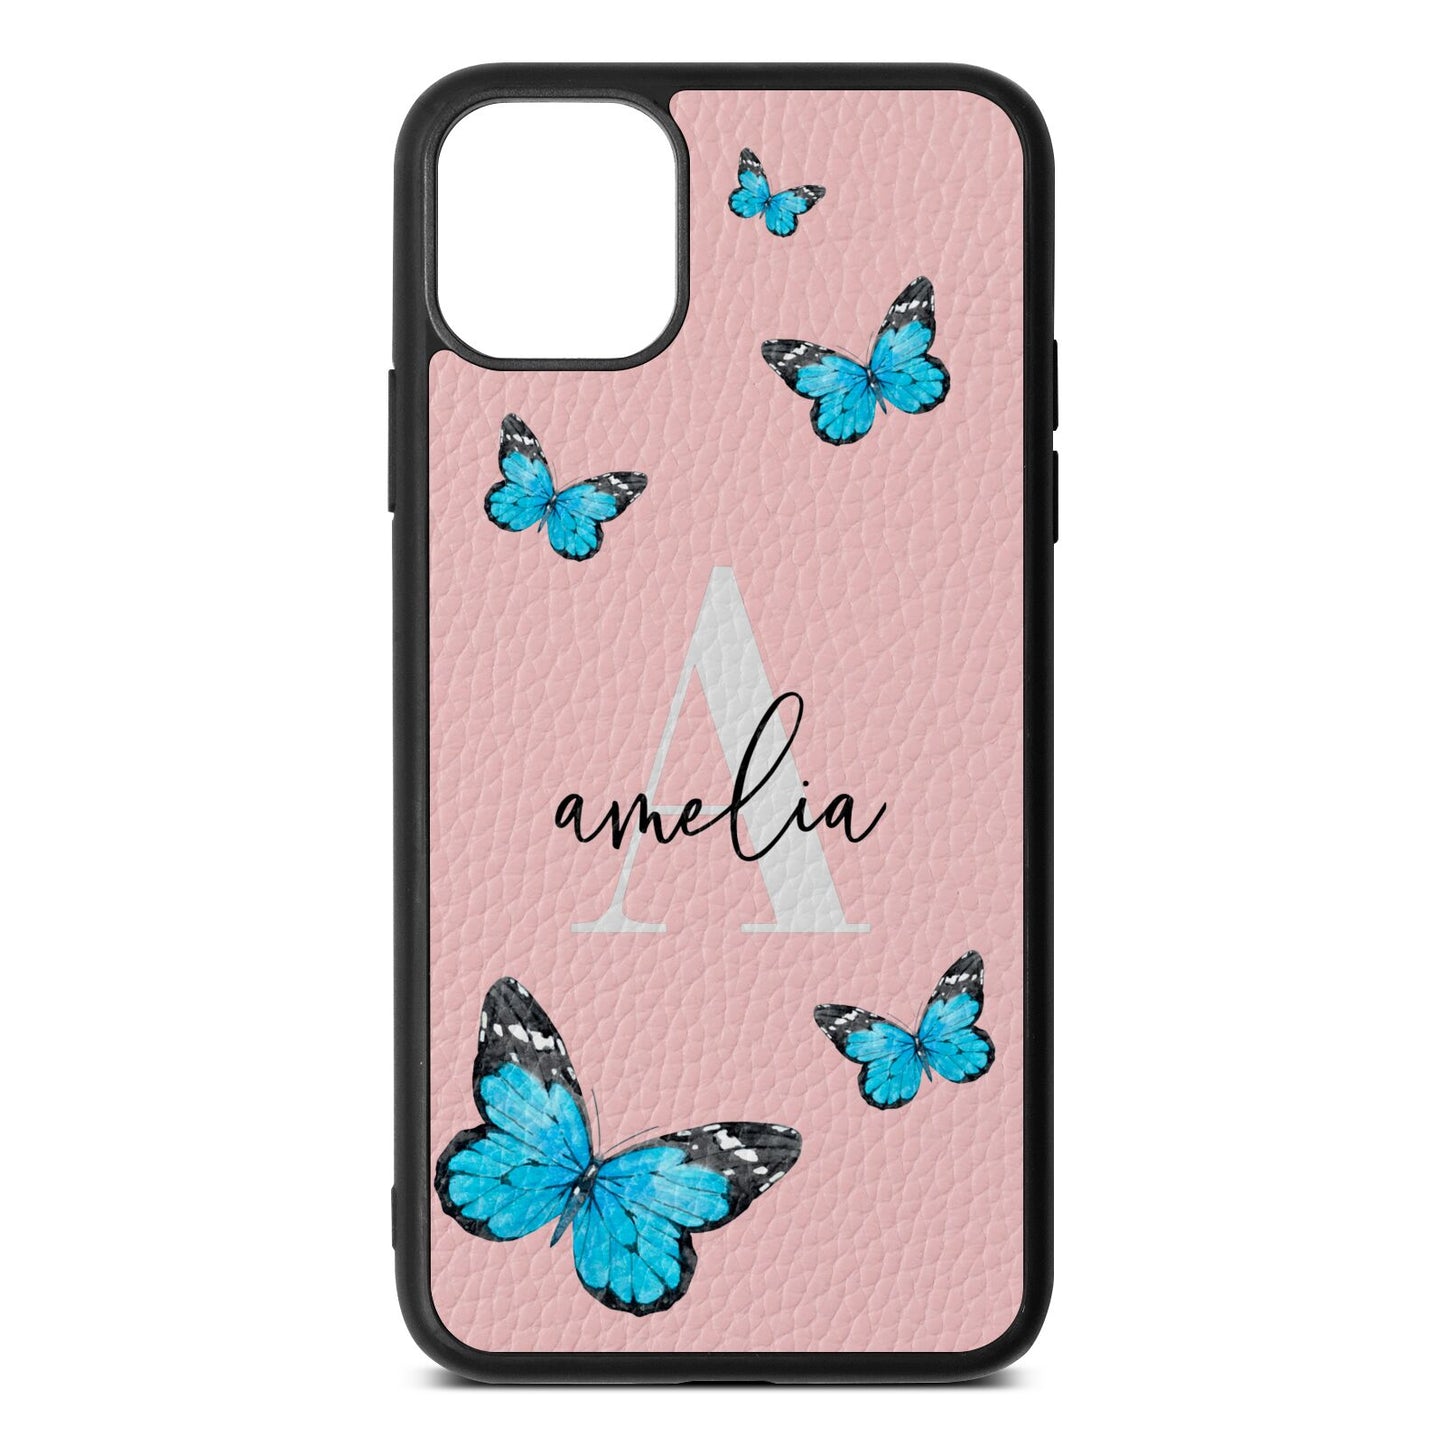 Blue Butterflies with Initial and Name Pink Pebble Leather iPhone 11 Pro Max Case